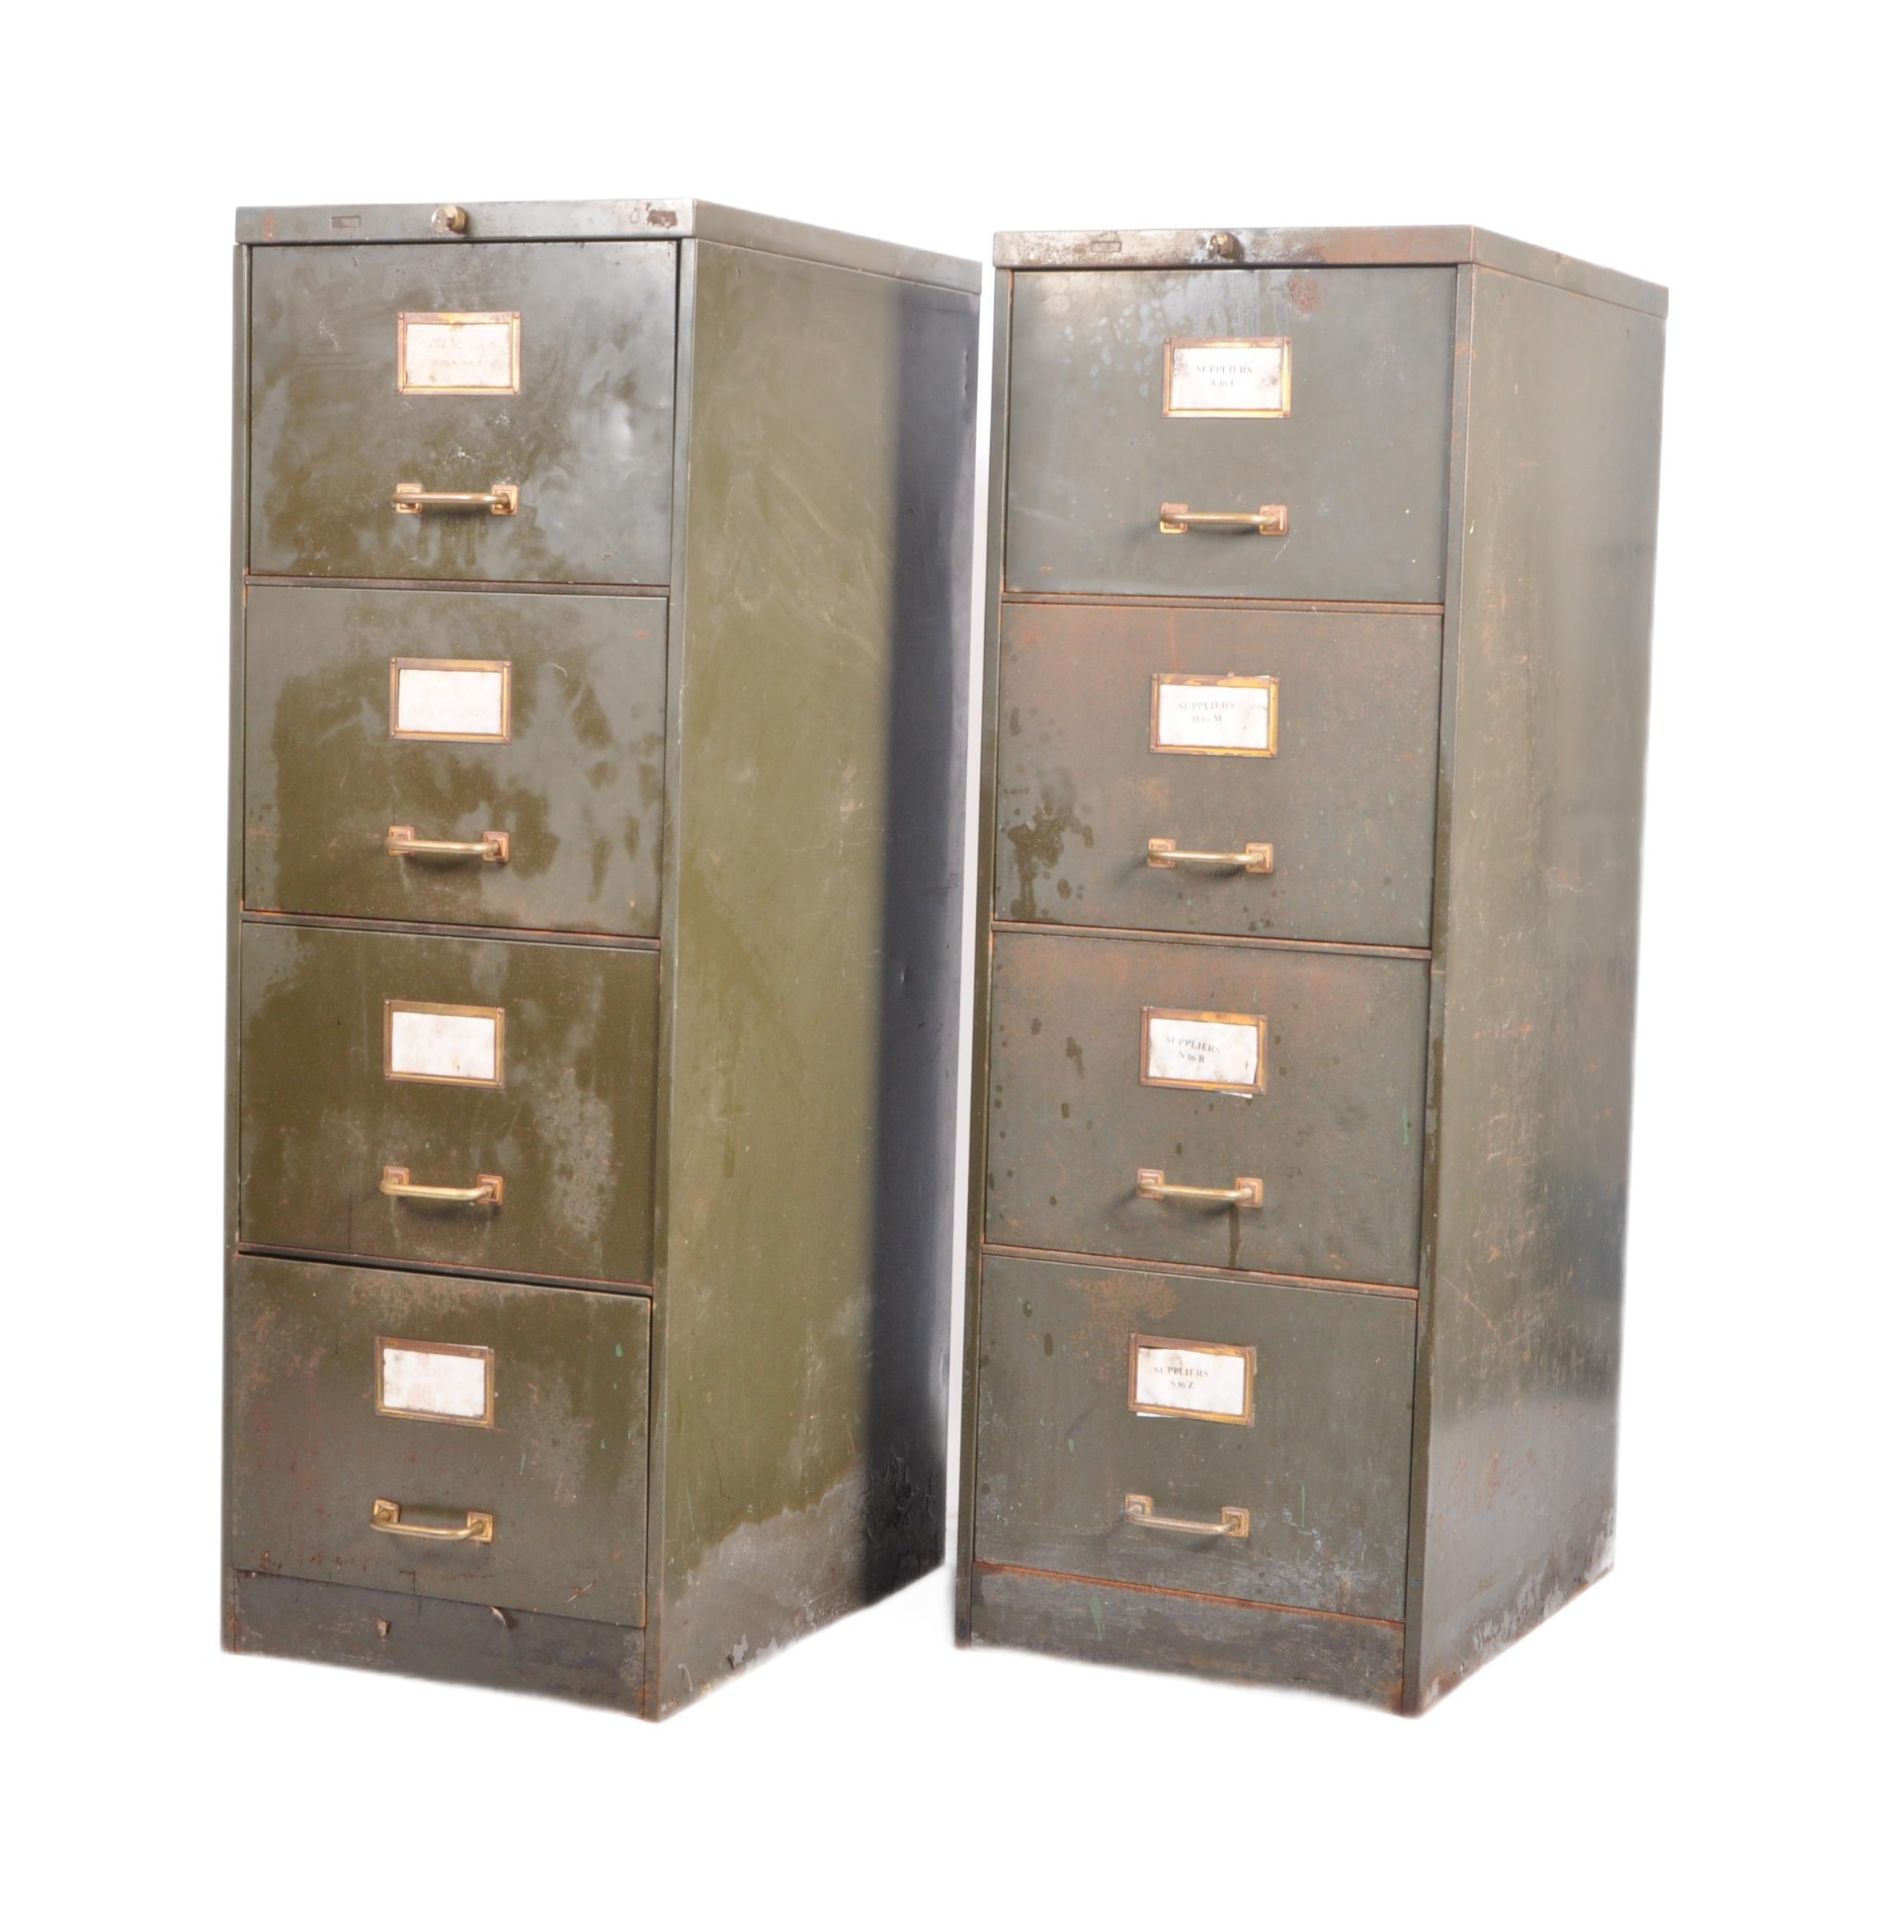 PAIR OF MID CENTURY INDUSTRIAL UPRIGHT FILING CABINETS